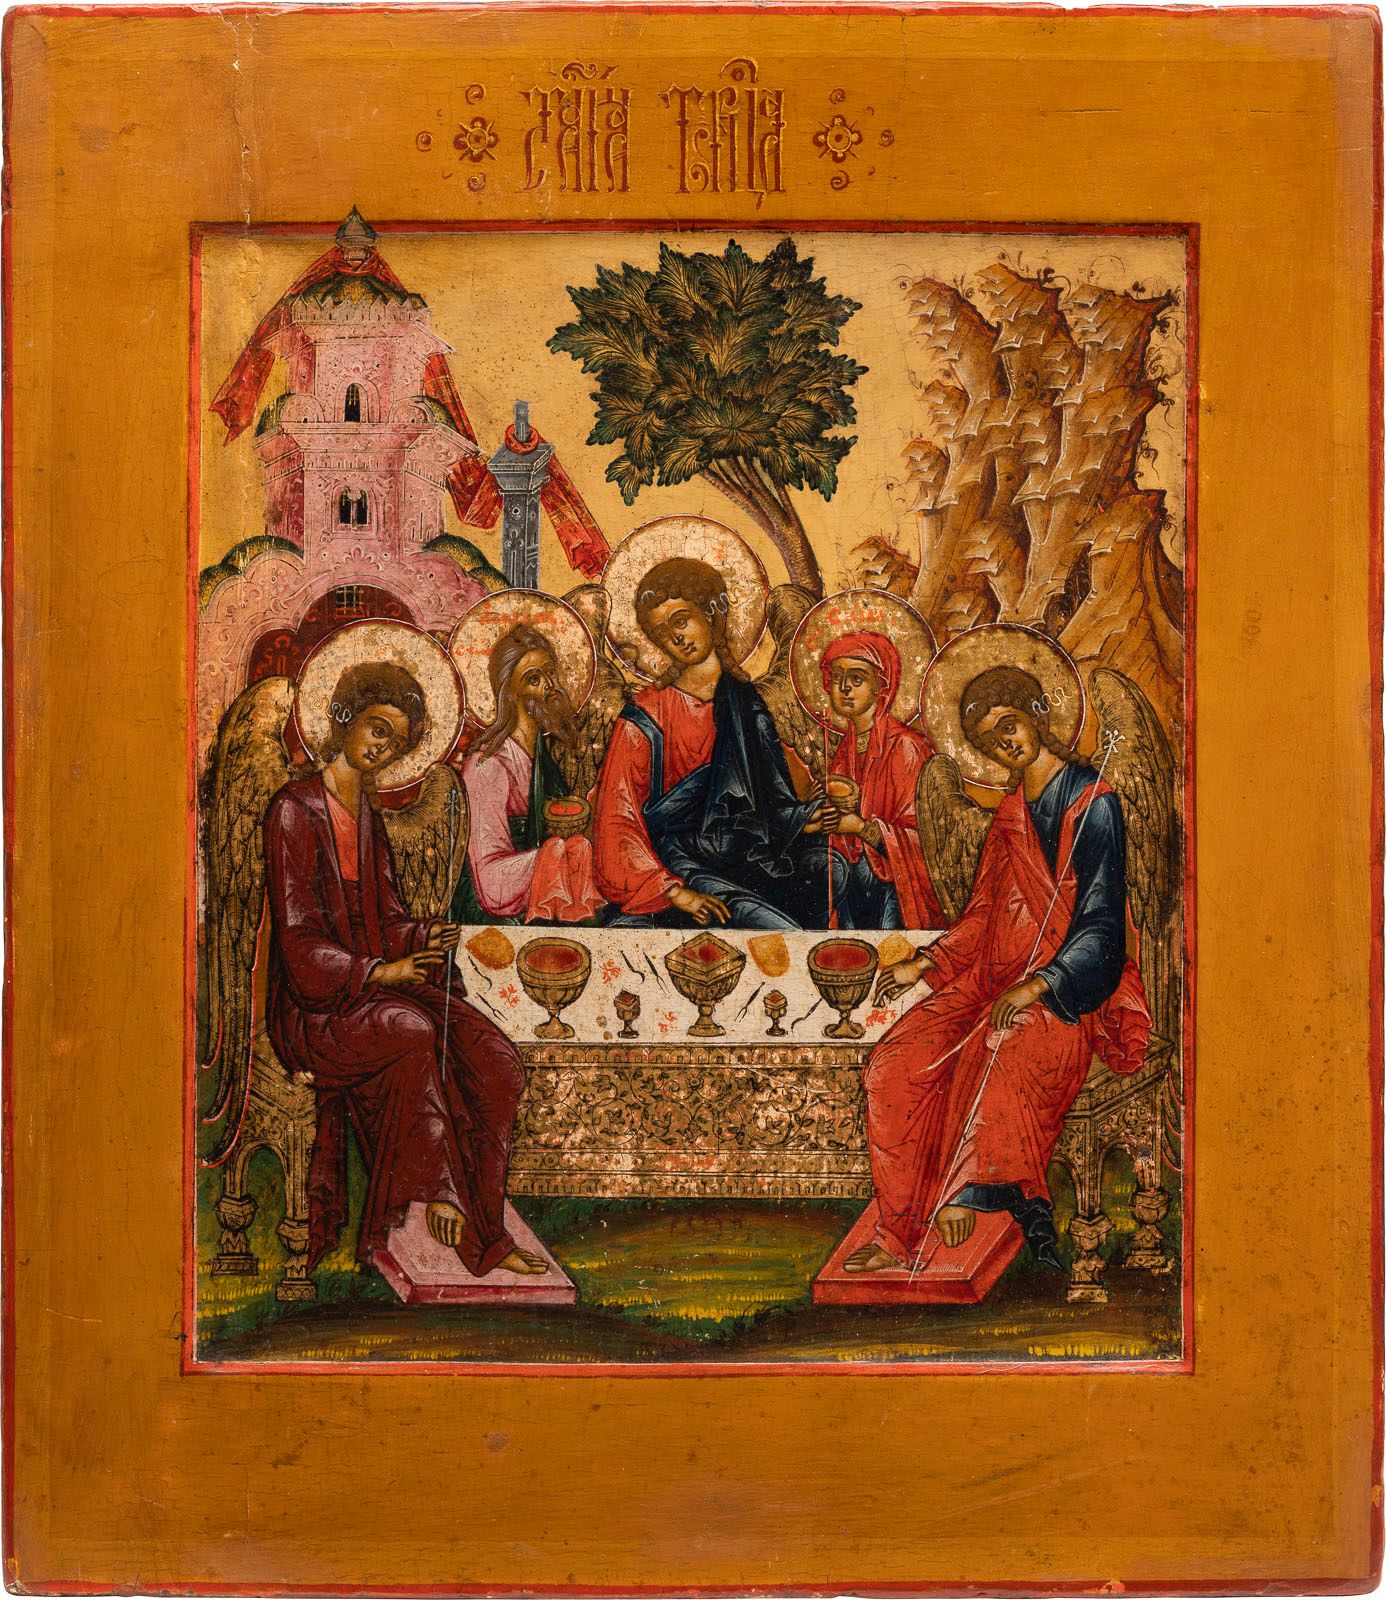 A VERY FINE ICON SHOWING THE OLD TESTAMENT TRINITY A VERY FINE ICON SHOWING THE &hellip;